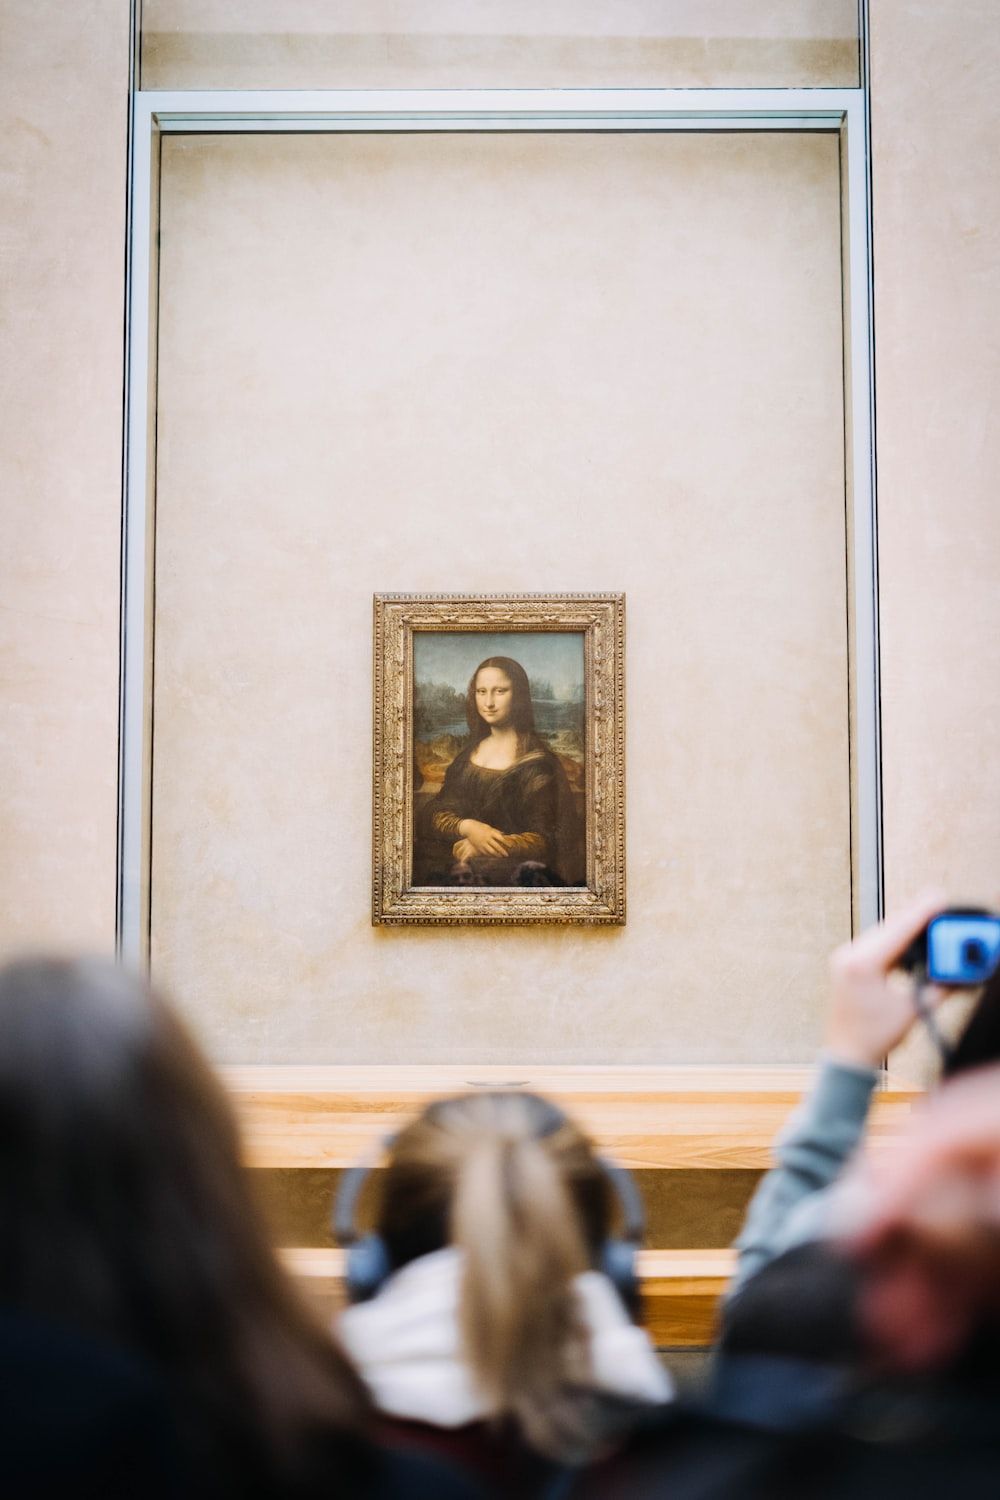 People taking photos of the Mona Lisa painting at the Louvre Museum in Paris. - Mona Lisa